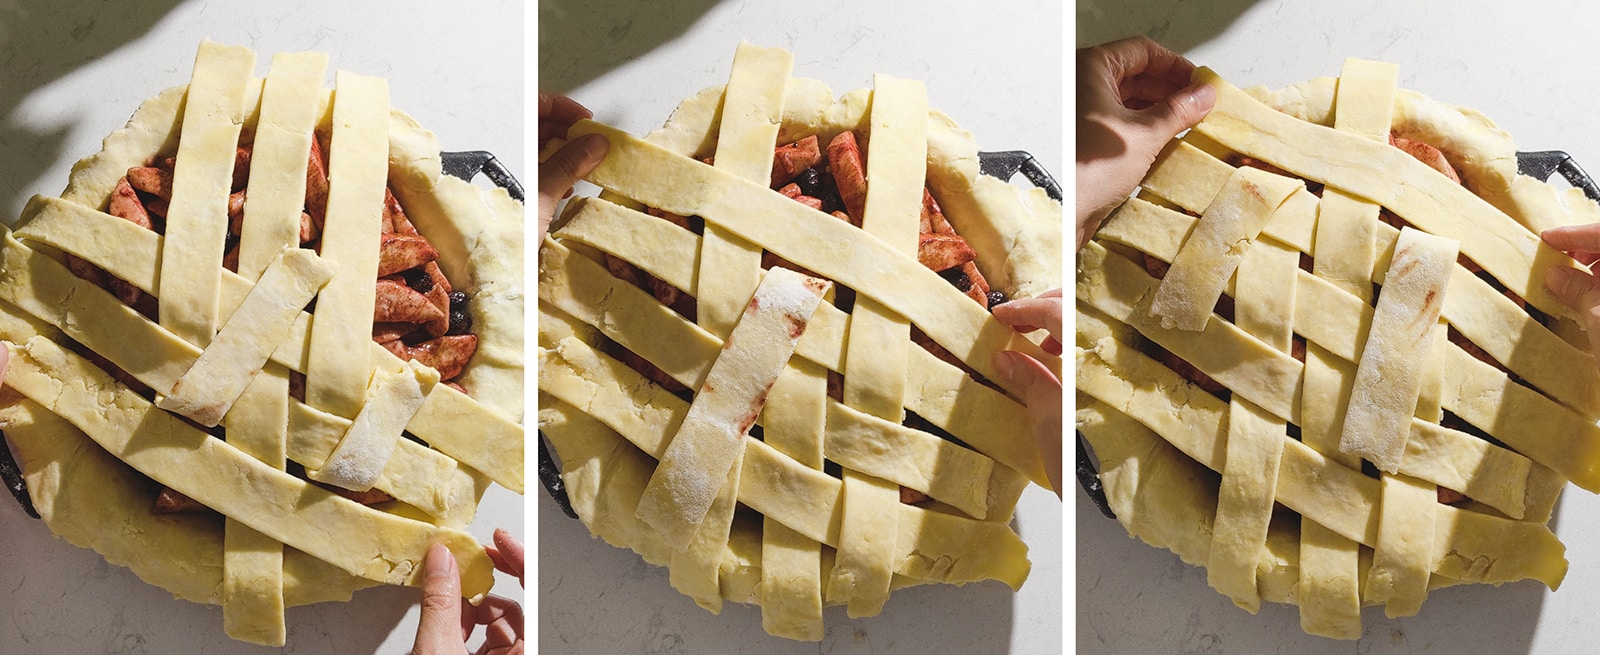 Weaving strips of dough into a lattice on top of a pie.